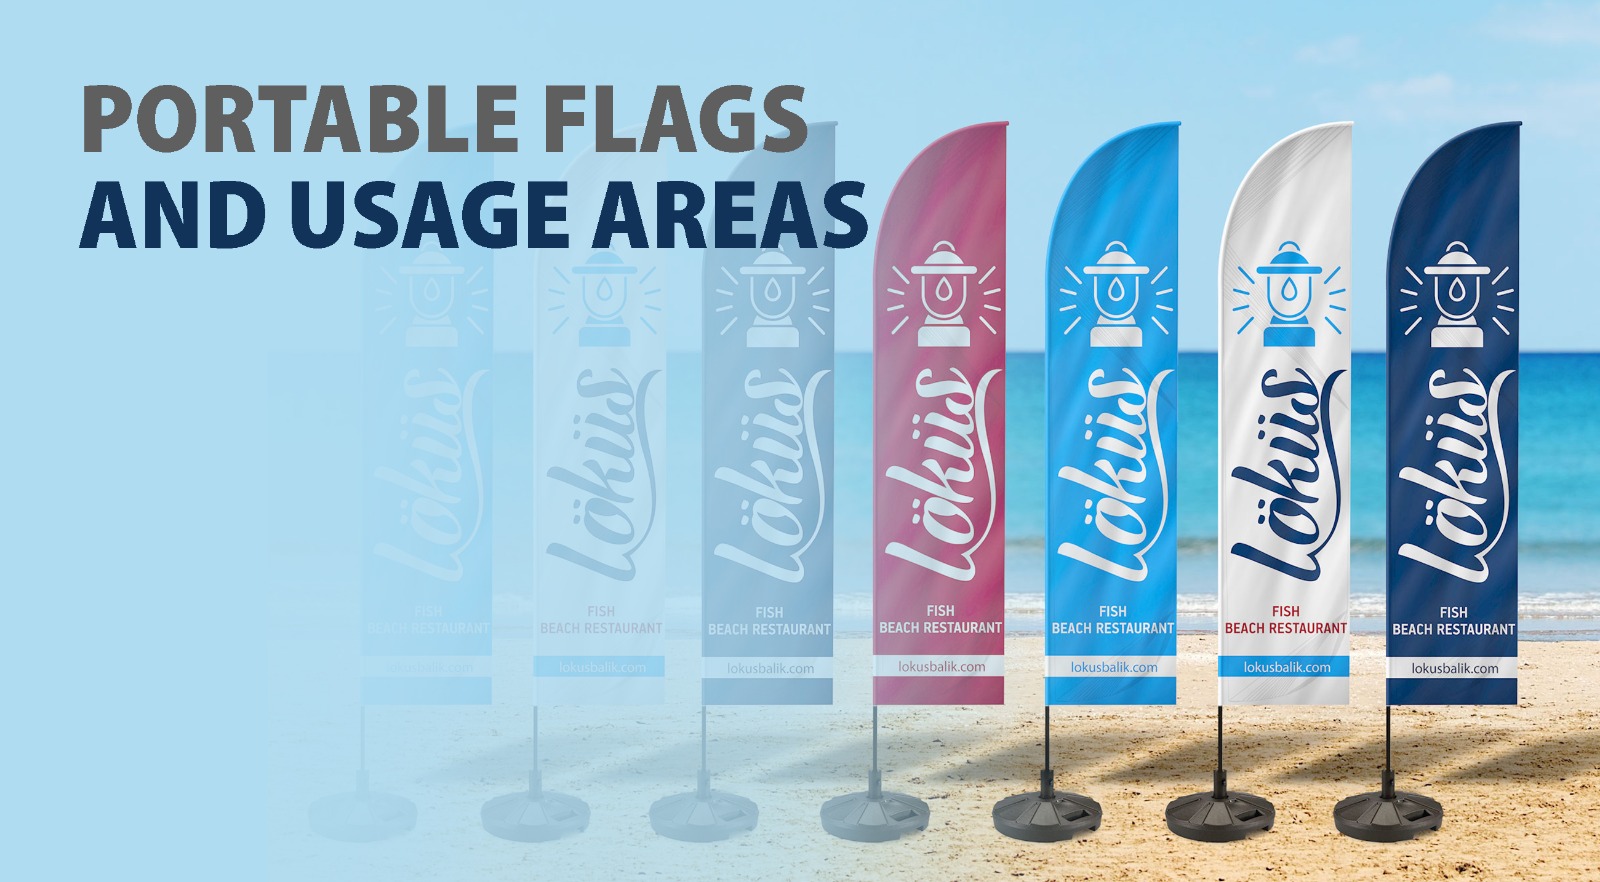 PORTABLE FLAGS AND USAGE AREAS